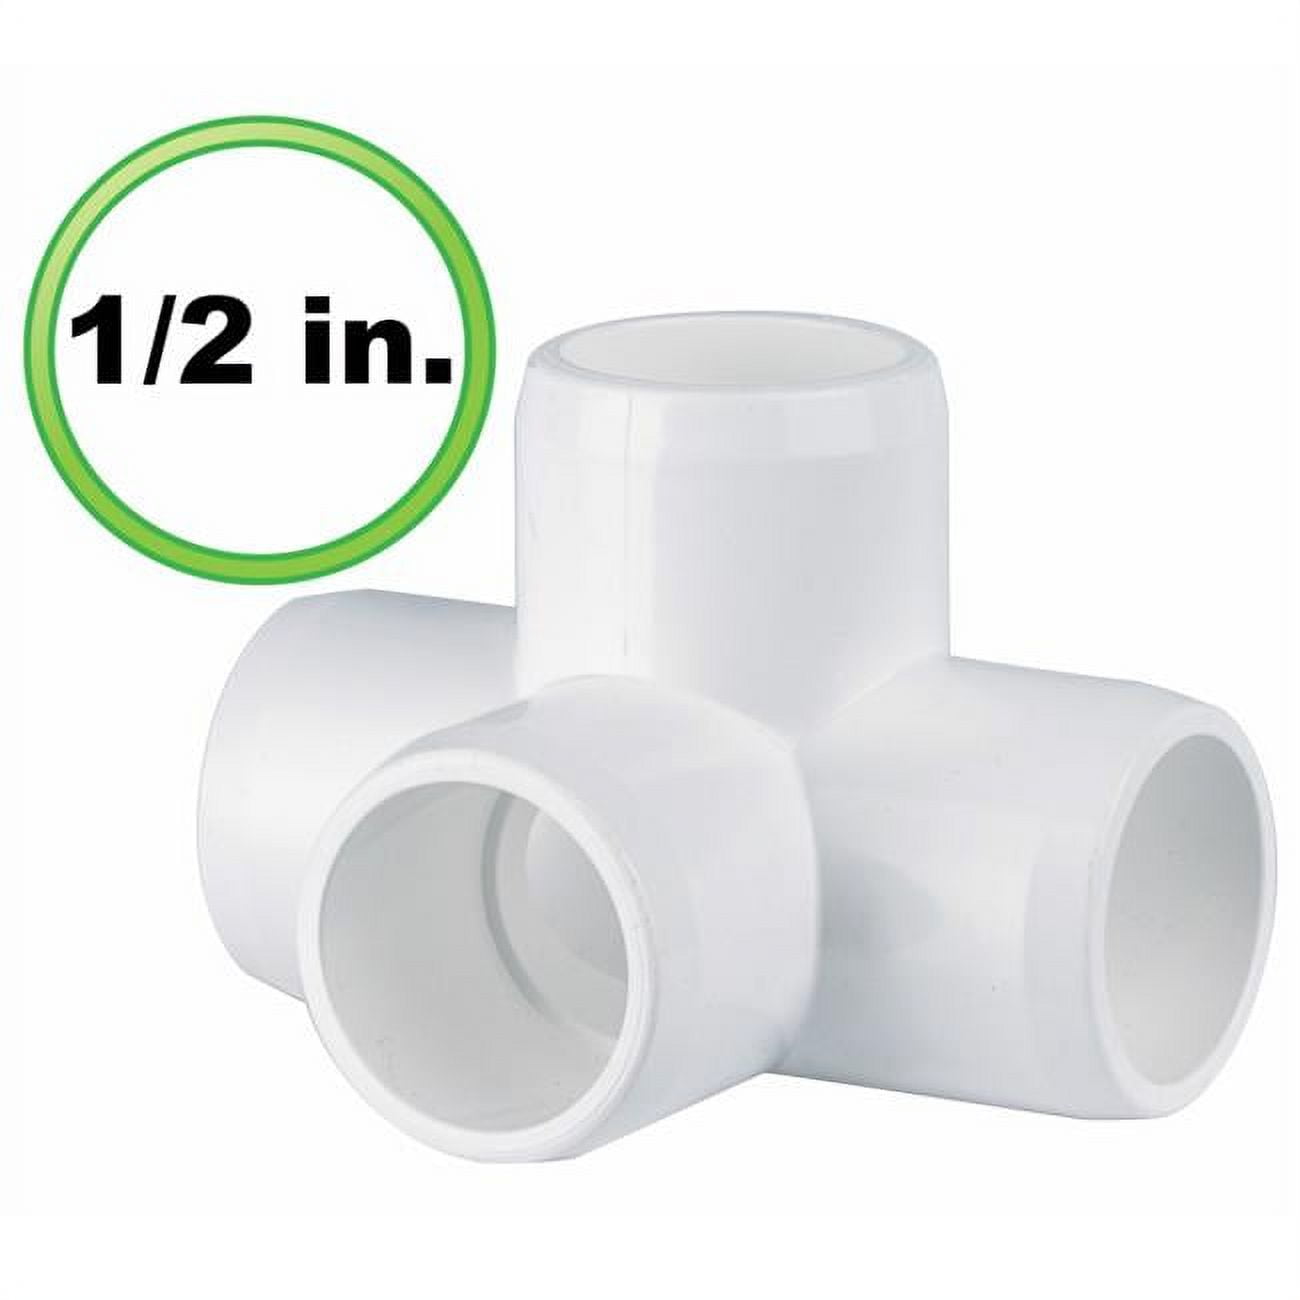 41-f 0.5 In. 4 Way Lt Pvc Pipe Fitting